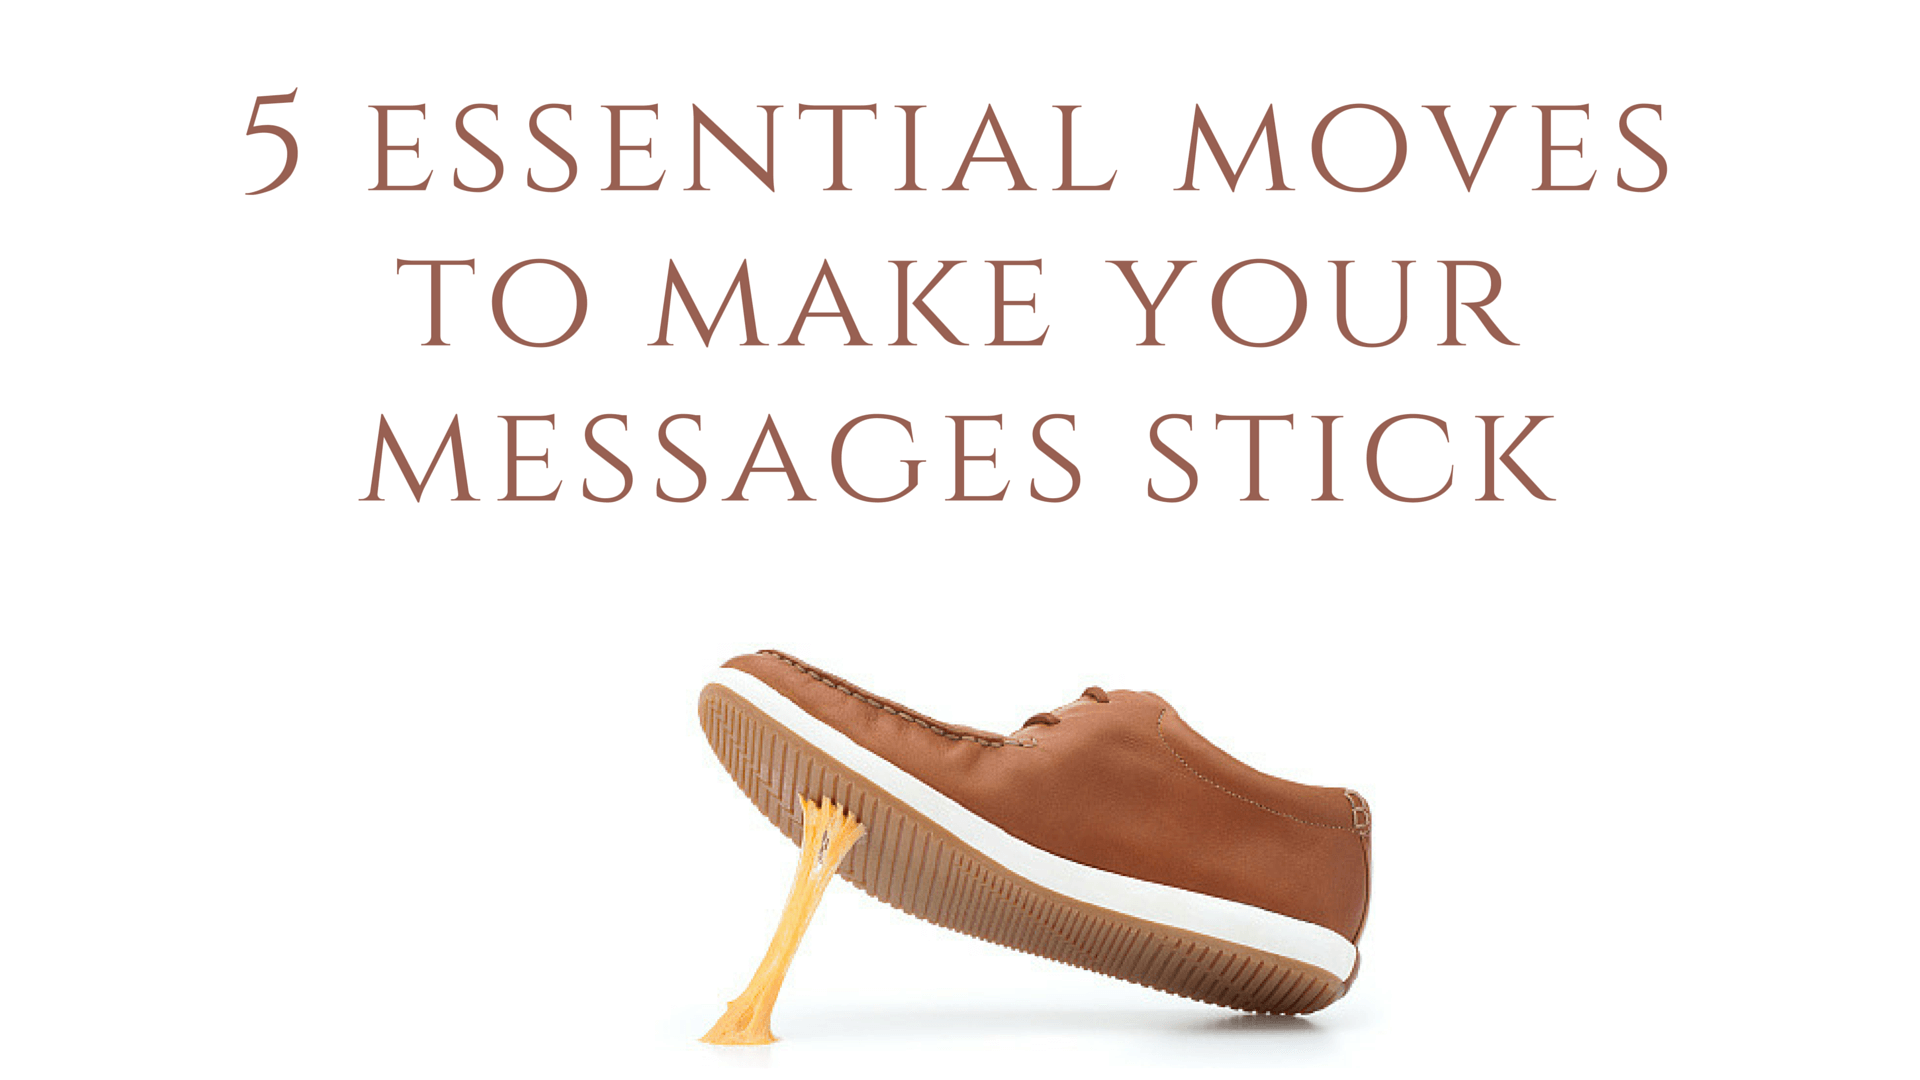 5 Essential Moves to Make Your Messages Stick